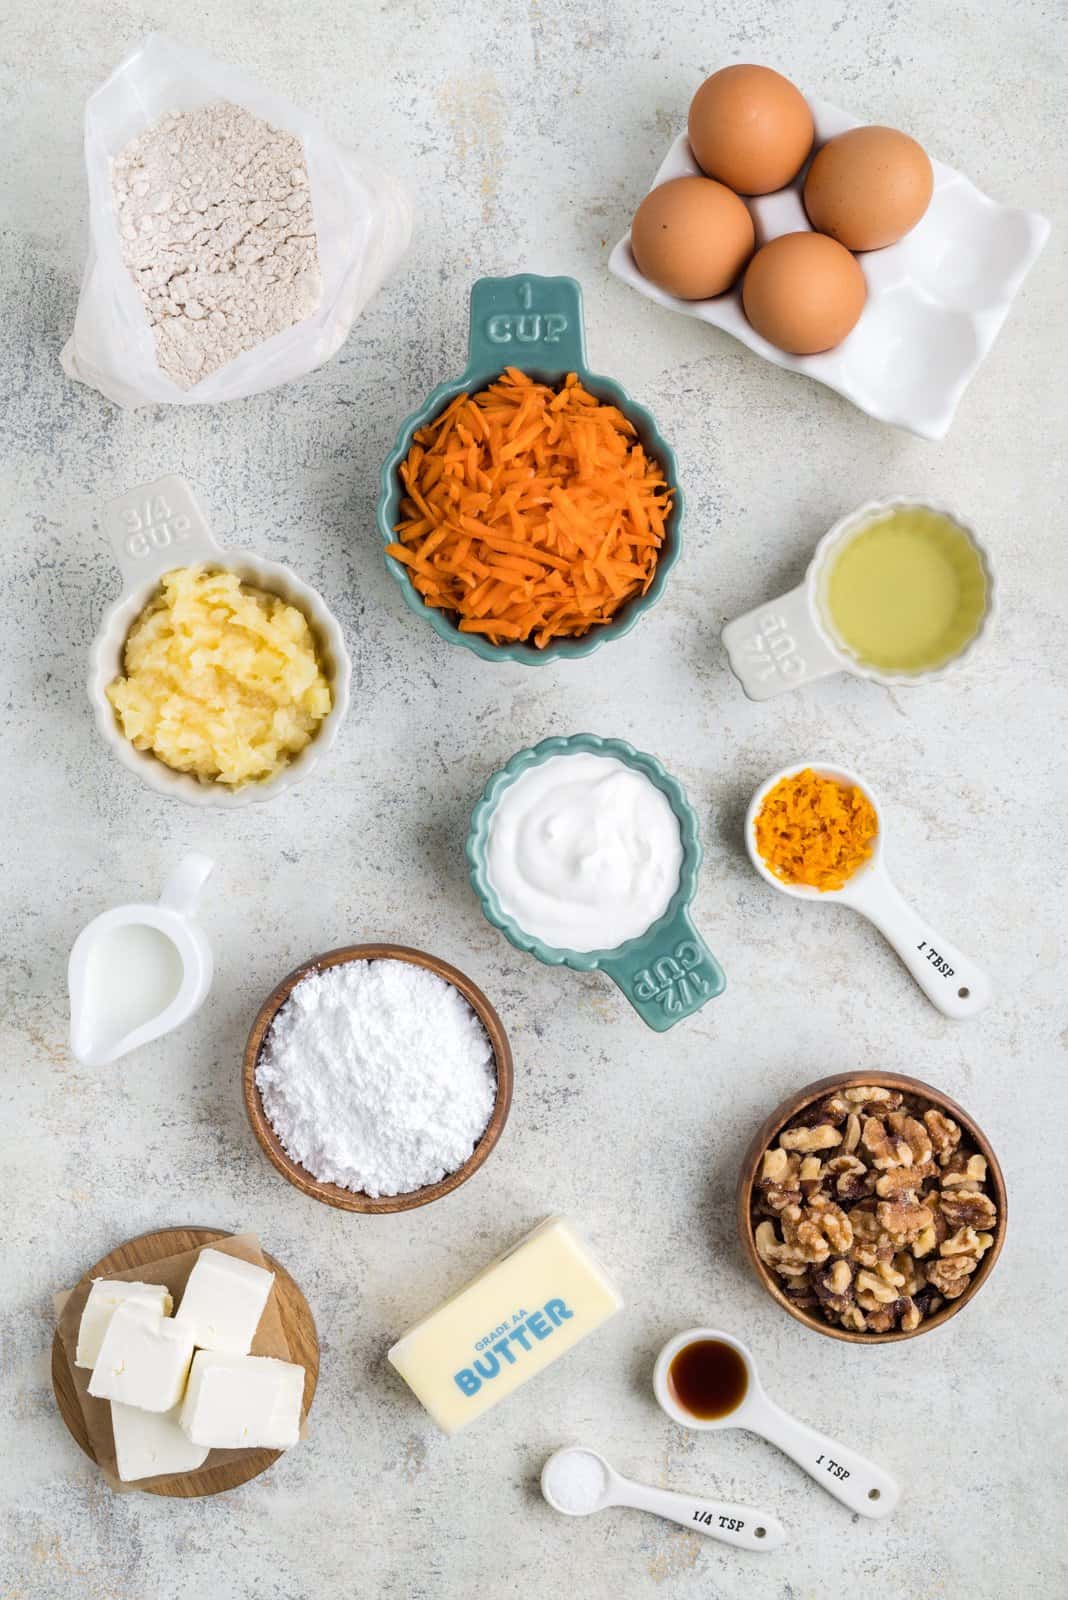 Spice cake mix, shredded carrots,eggs, canola oil, sour cream, cream cheese, orange zest, pineapple, walnuts, unsalted butter, powdered sugar, vanilla extract, kosher salt, and whole milk.